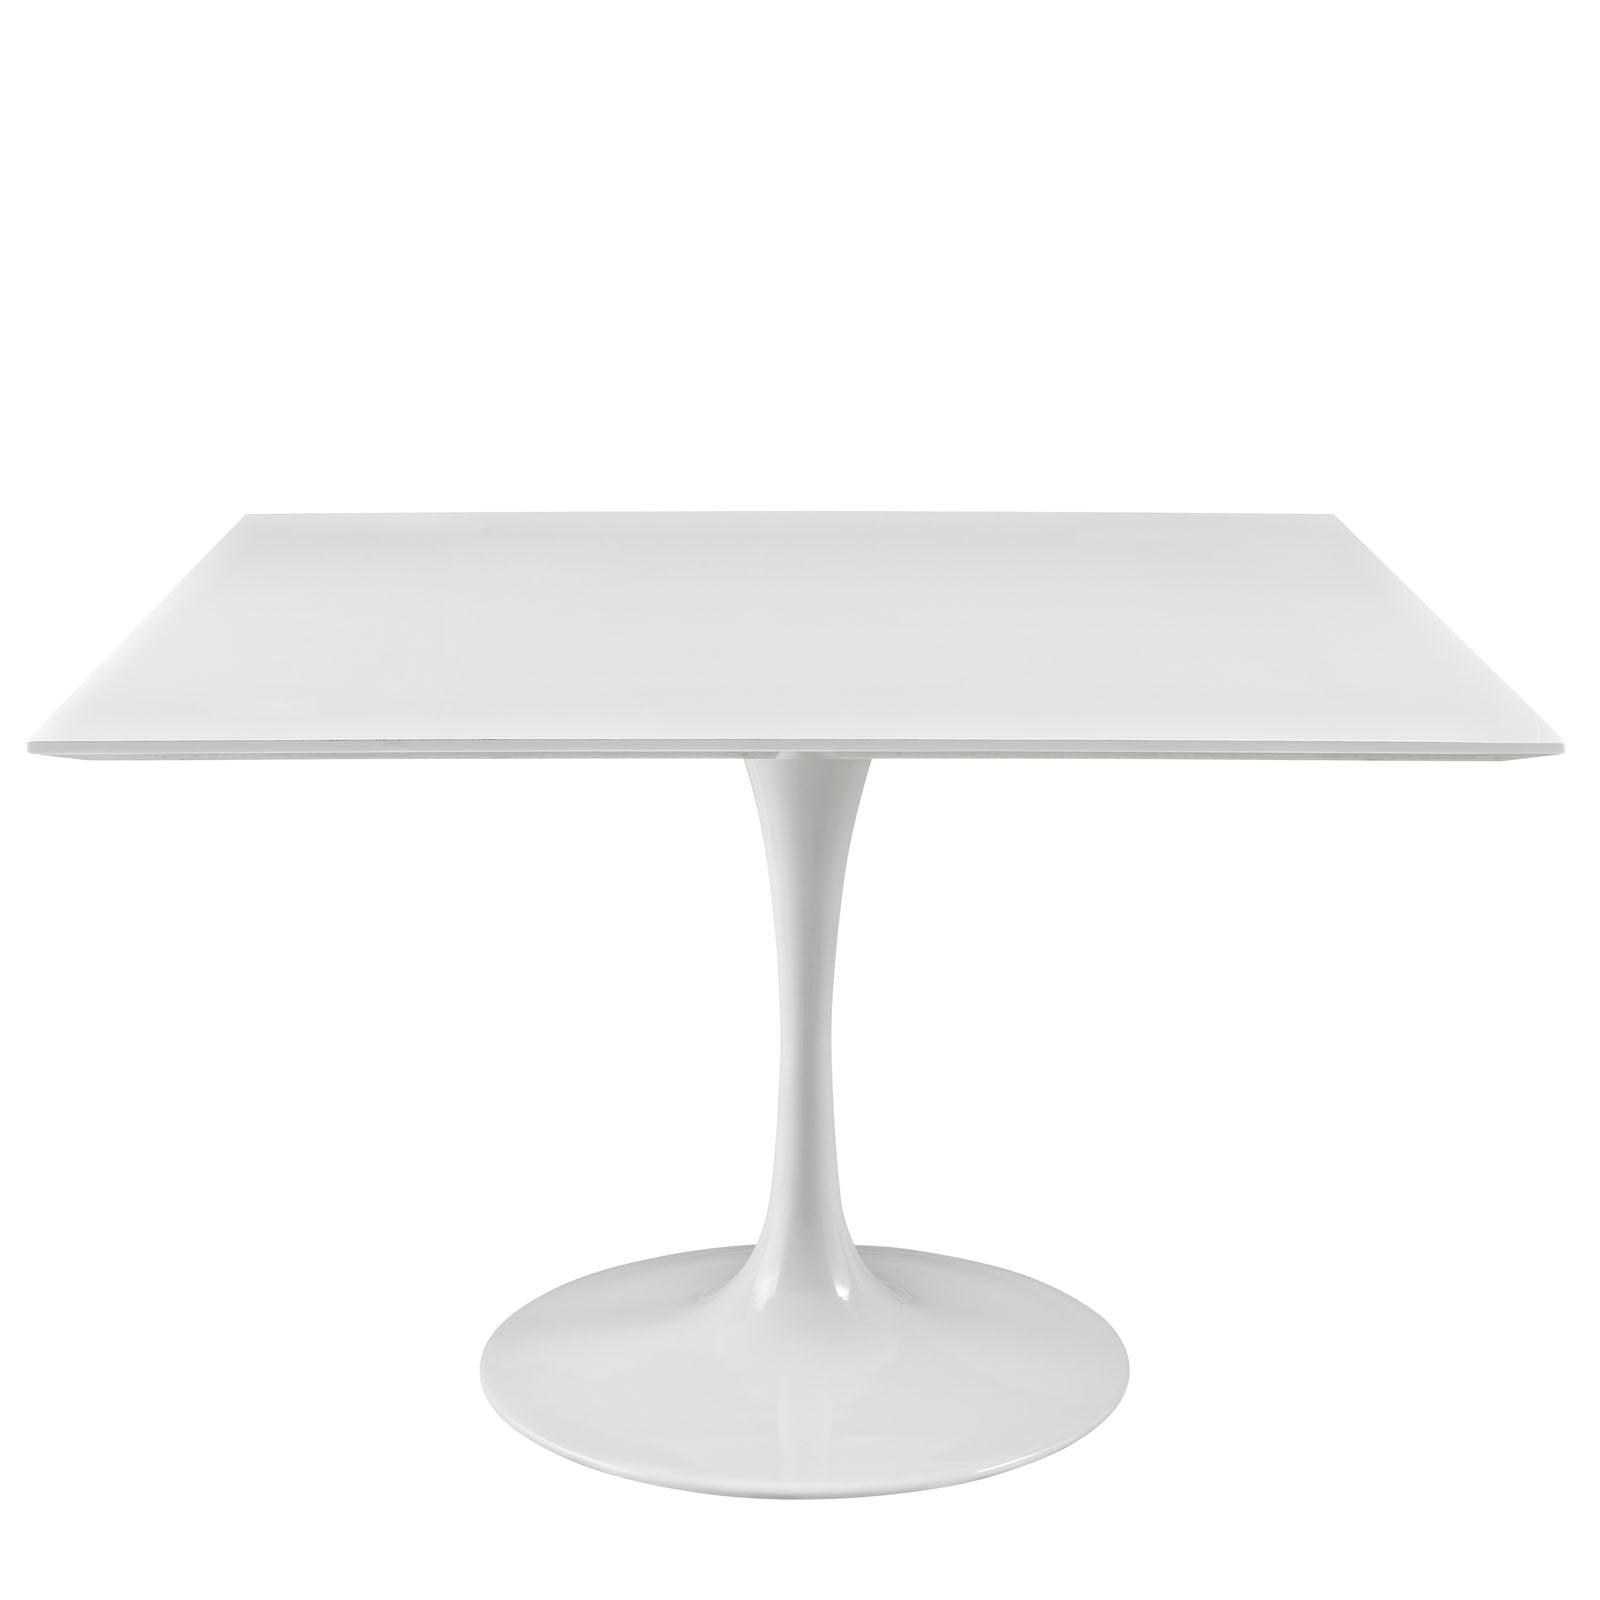 Lola 47" Square Wood Top Dining Table in White - Euro Living Furniture